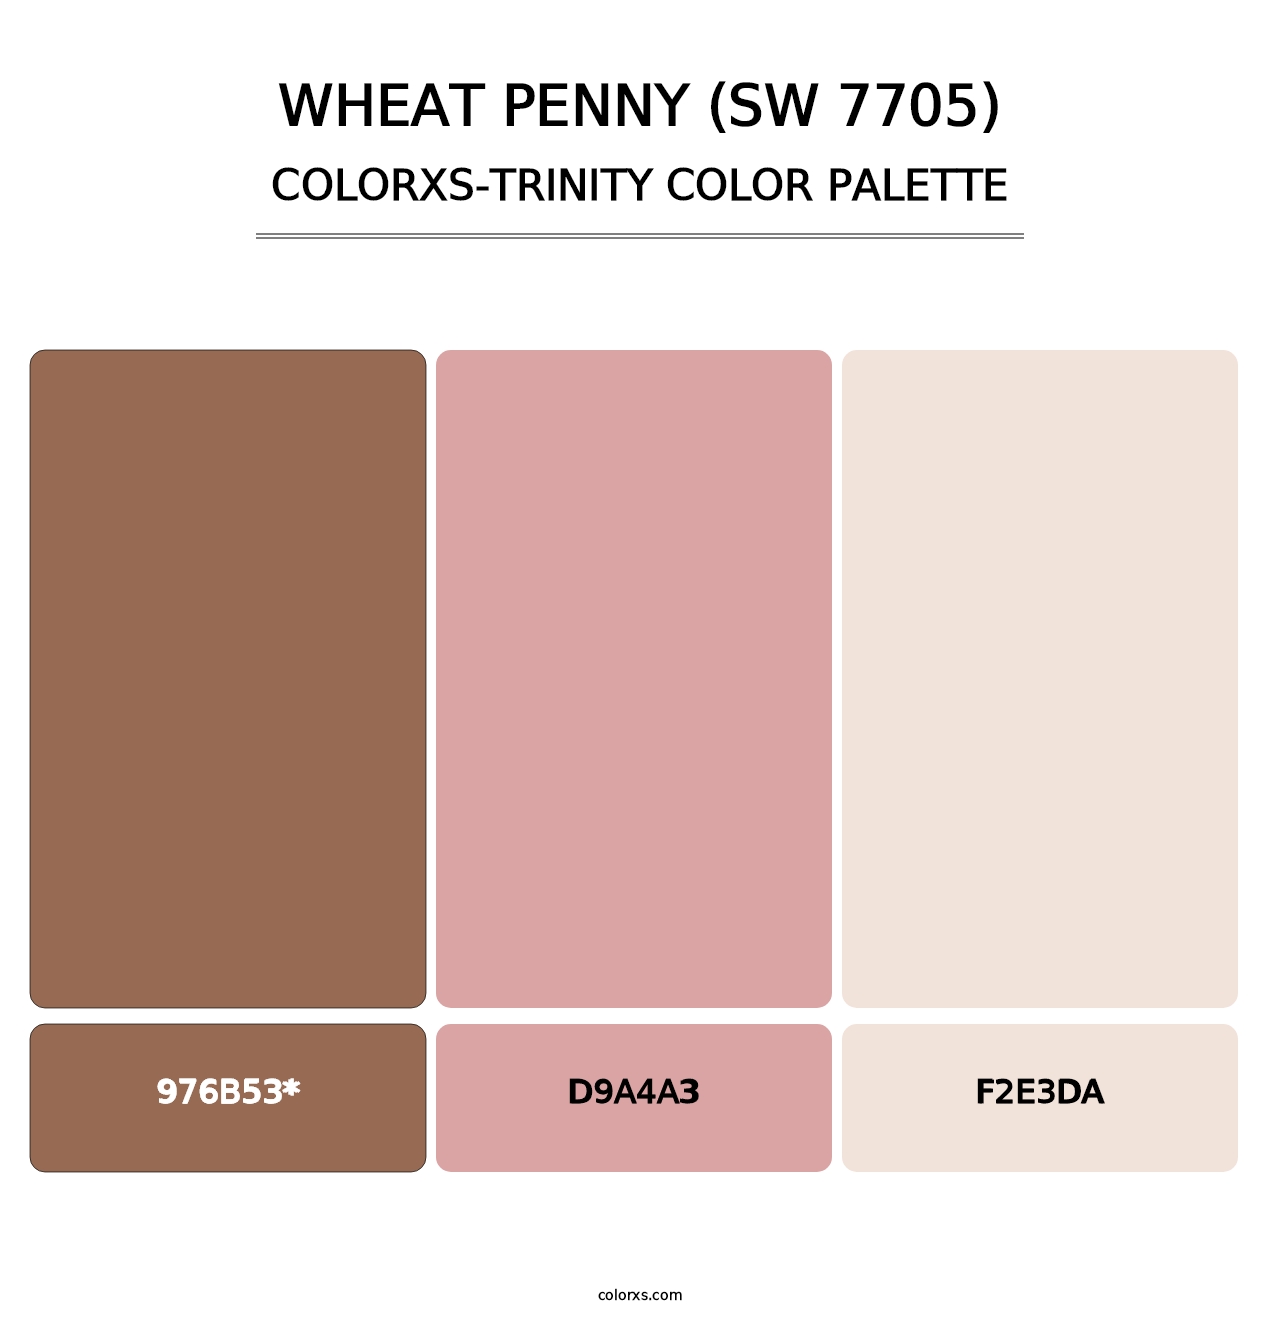 Wheat Penny (SW 7705) - Colorxs Trinity Palette